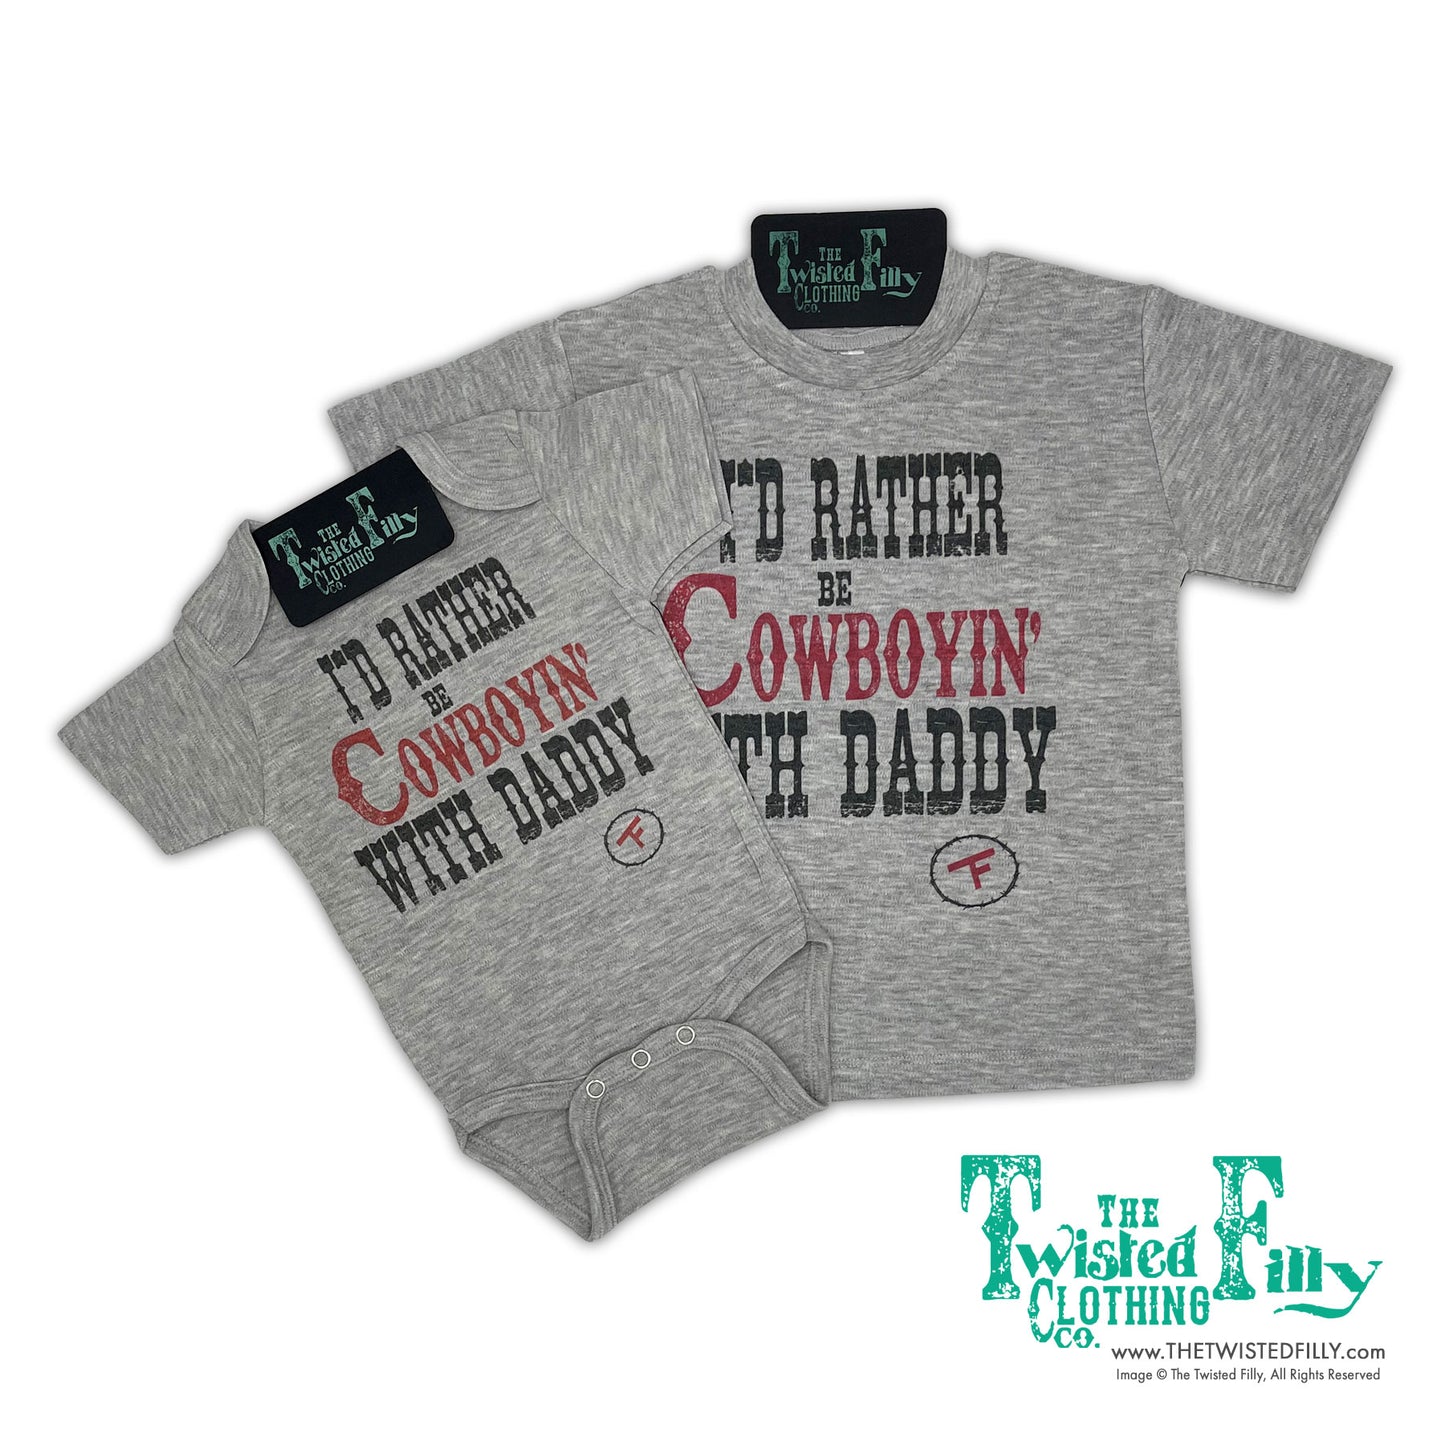 I'd Rather Be Cowboyin' With Daddy - S/S Infant Tee - Gray